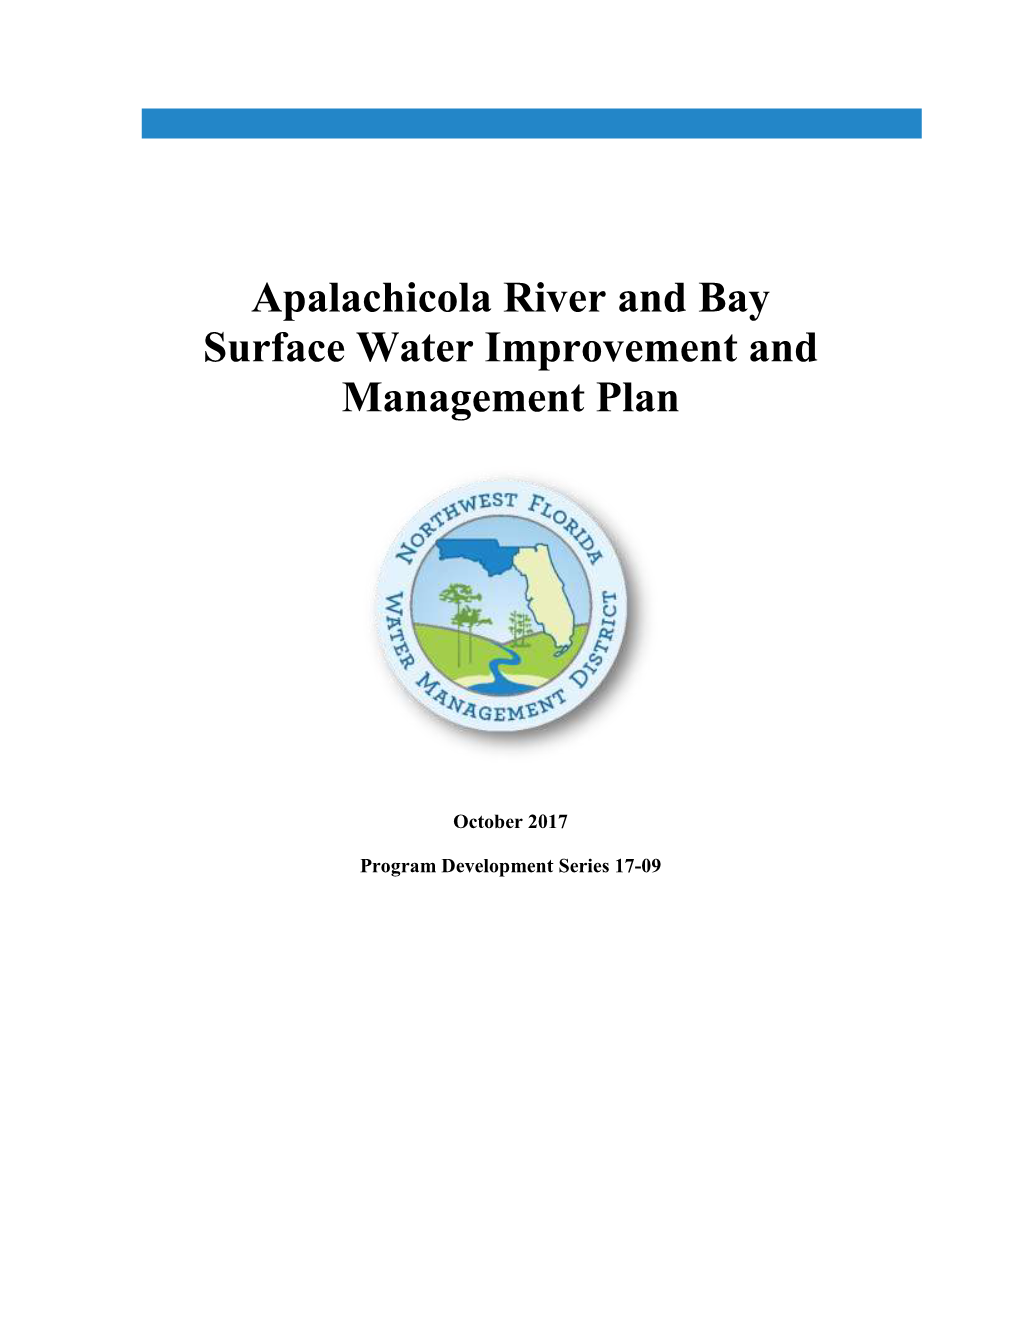 Apalachicola River and Bay Surface Water Improvement and Management Plan